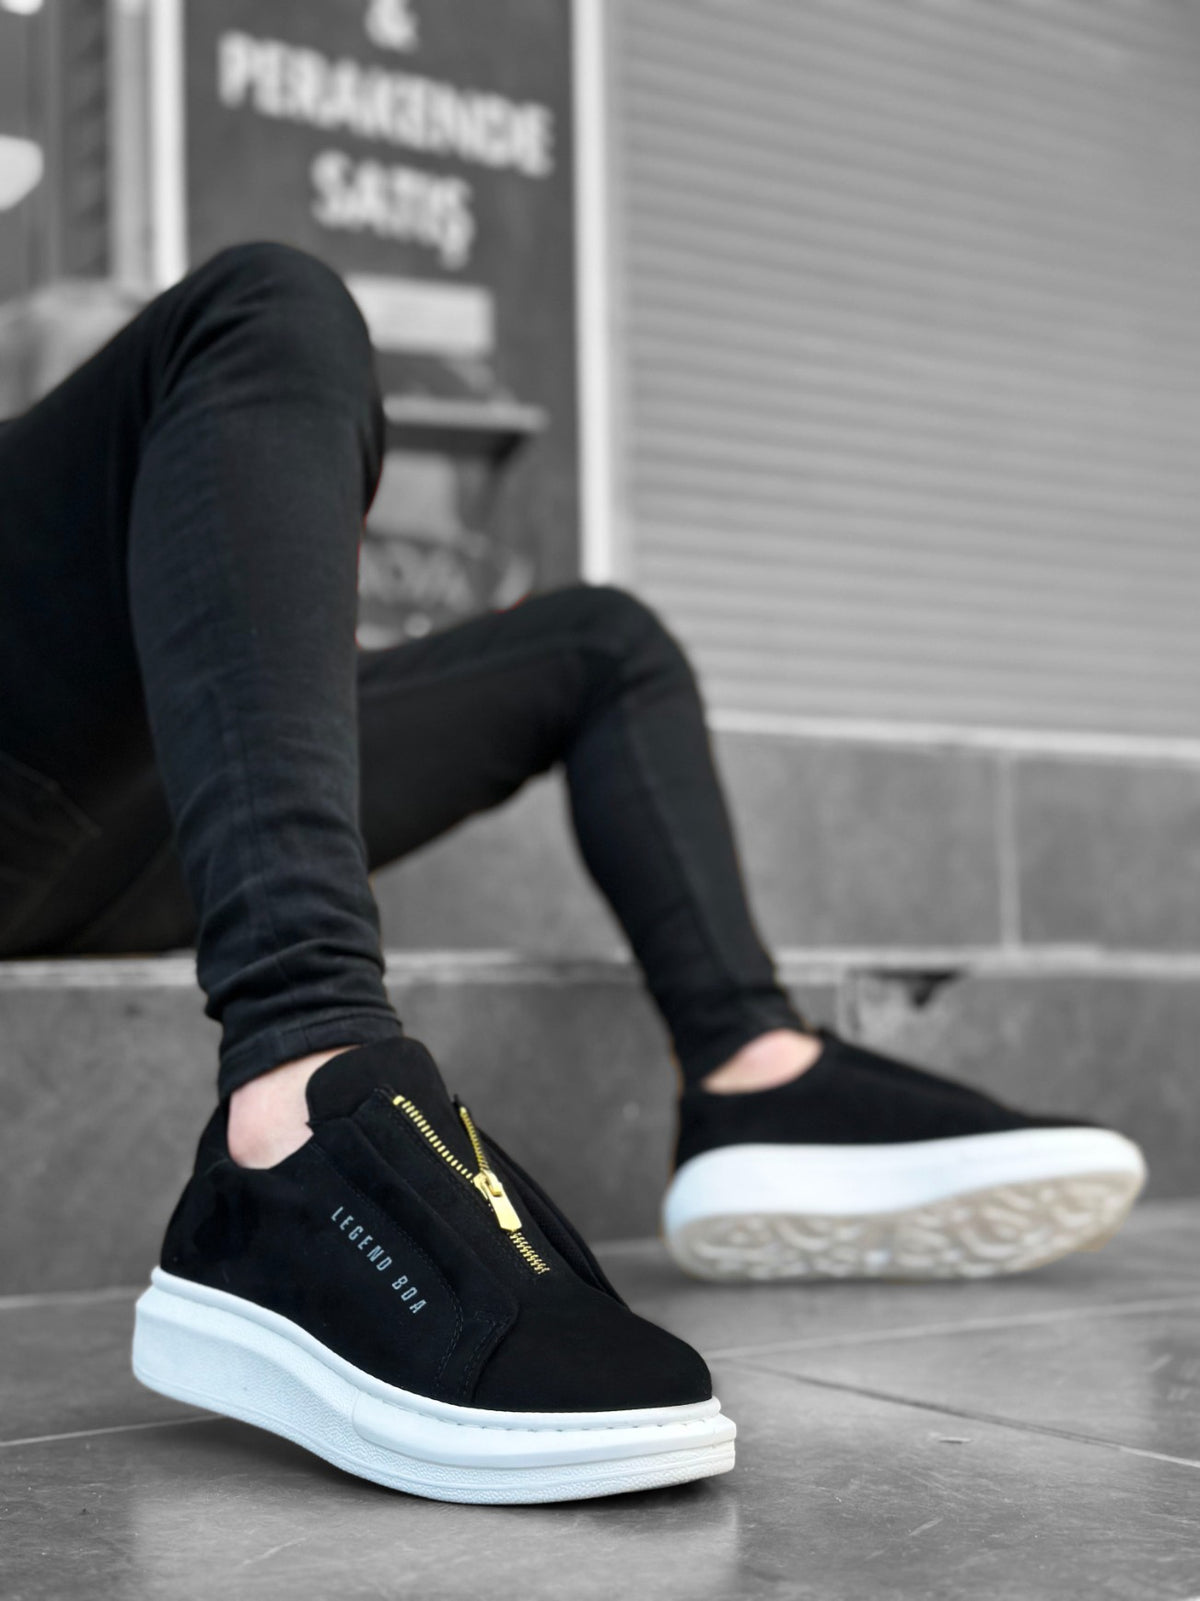 BA0310 BOA Thick Suede High Sole Zipper Black White Men's Sneakers Shoes - STREETMODE™